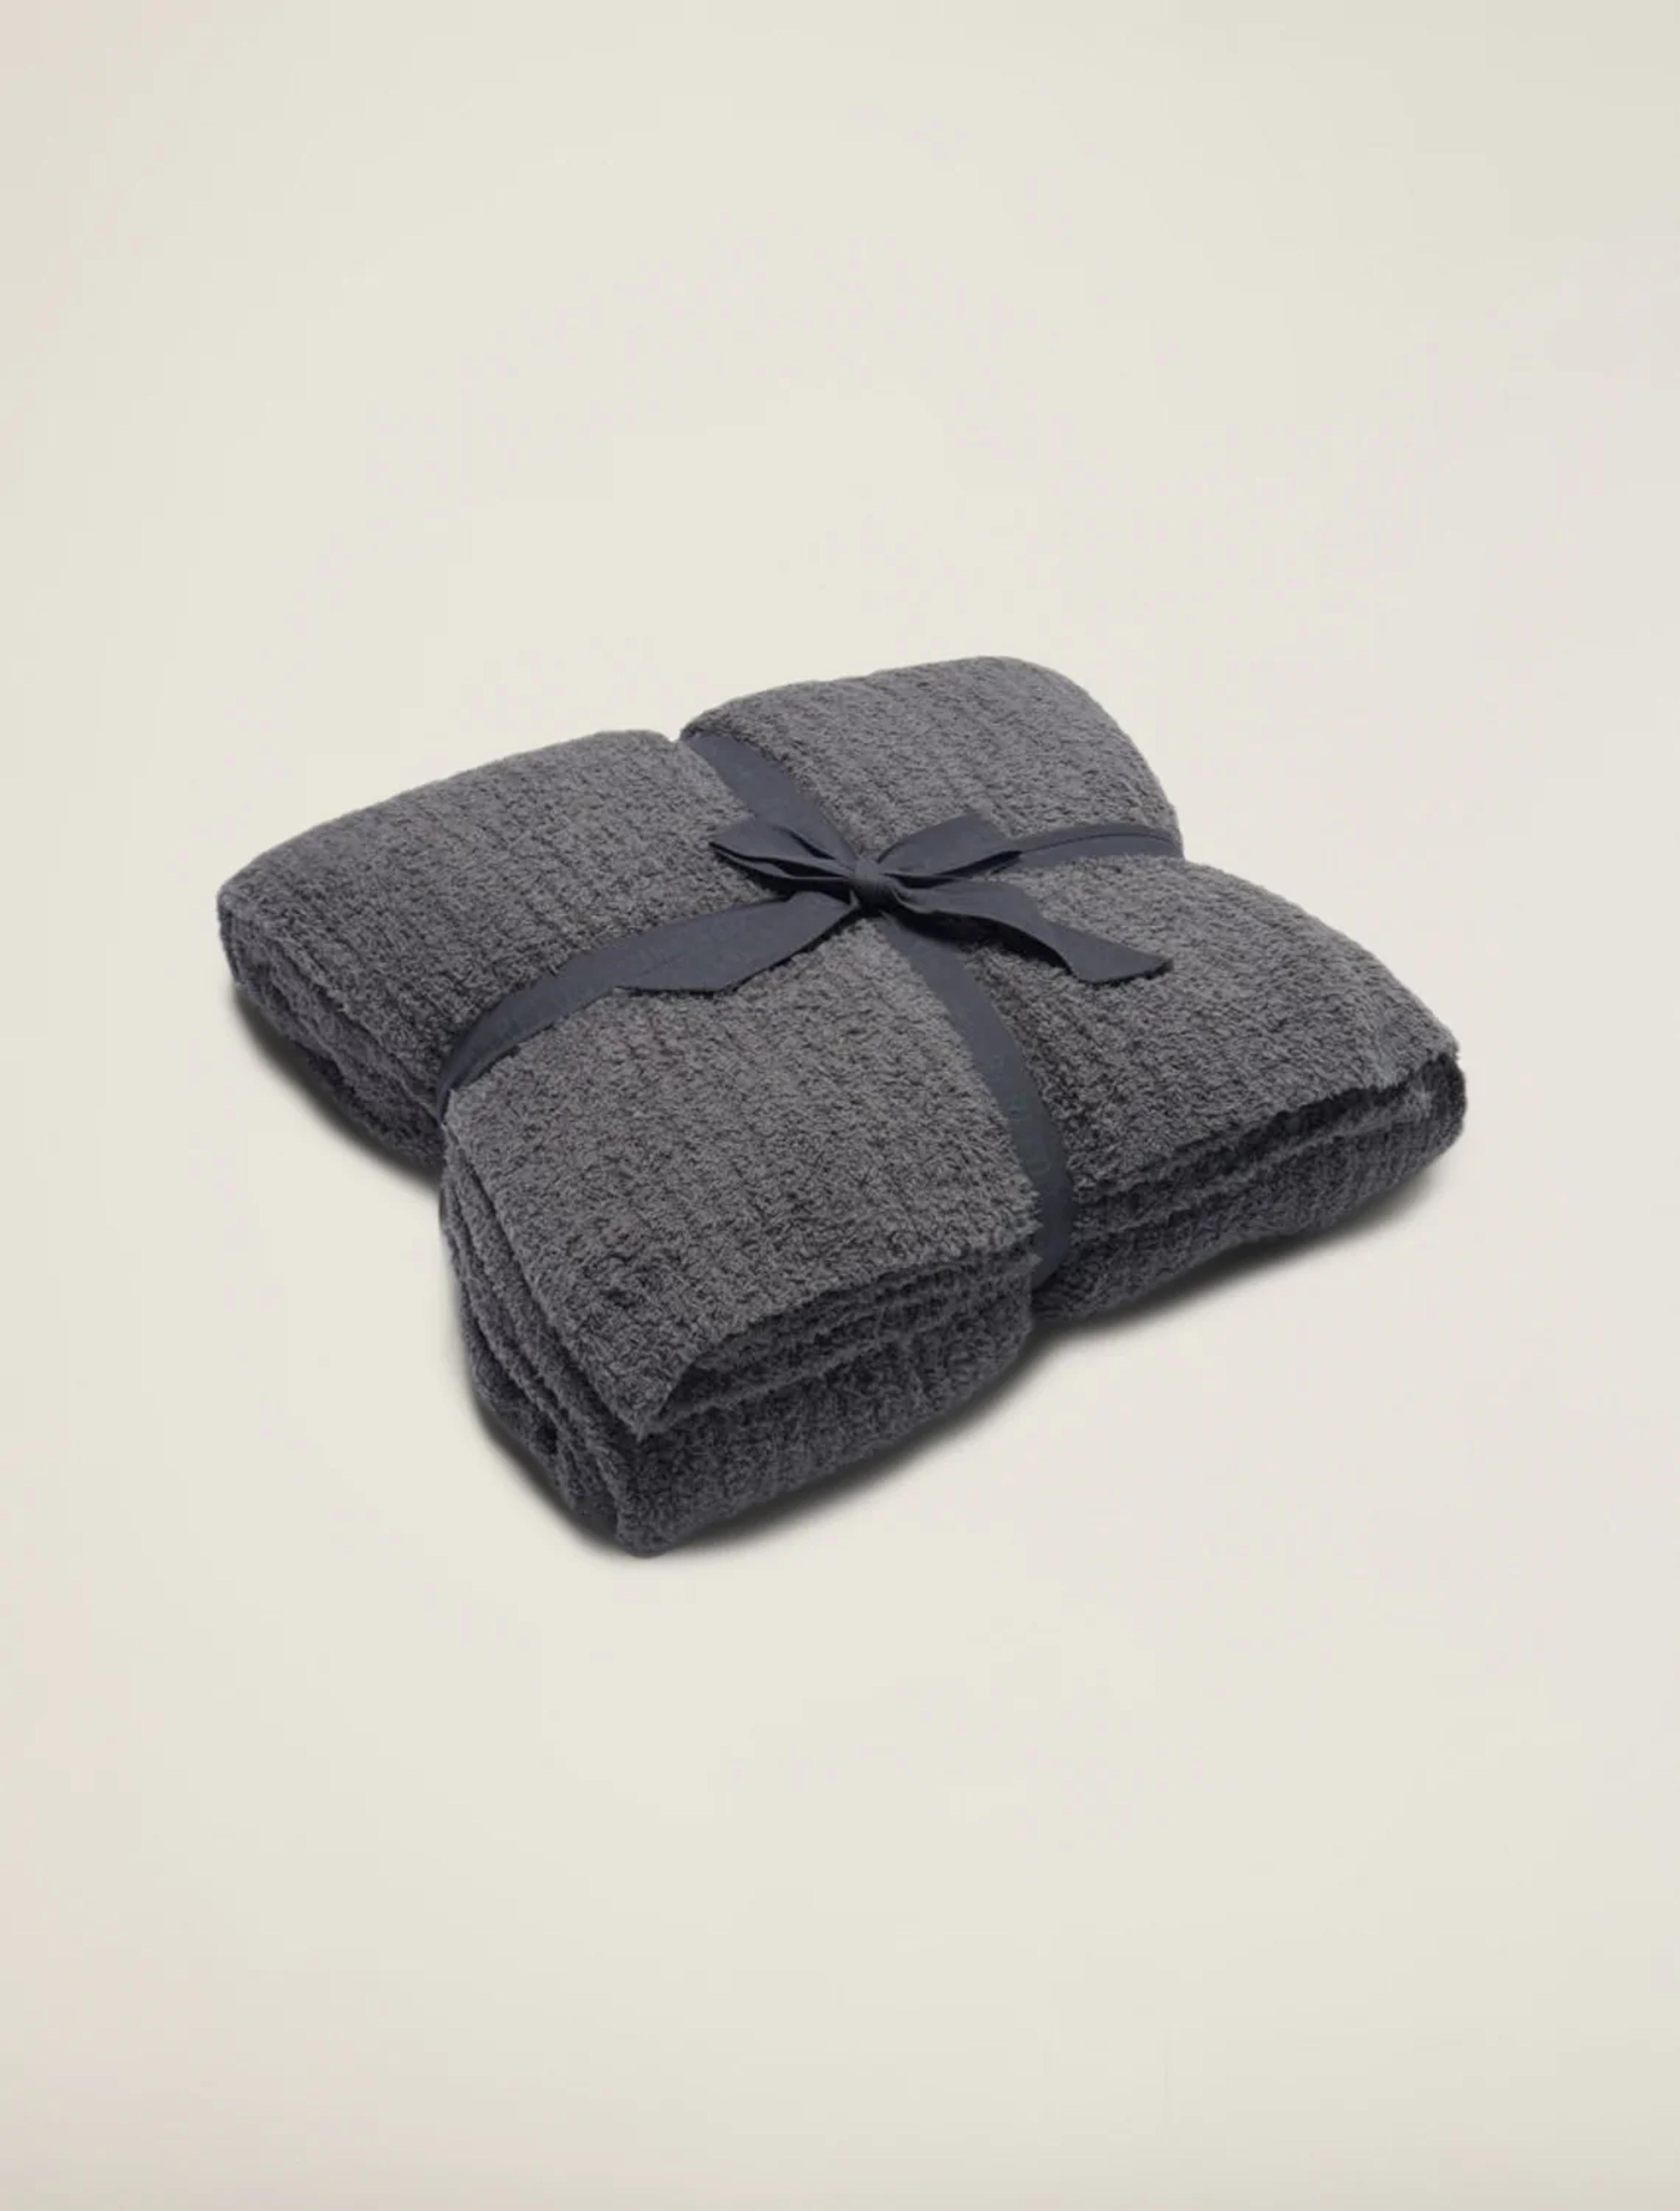 CozyChic® Ribbed Bed Blanket | Barefoot Dreams® Official Site - Loungewear, Apparel, Blankets